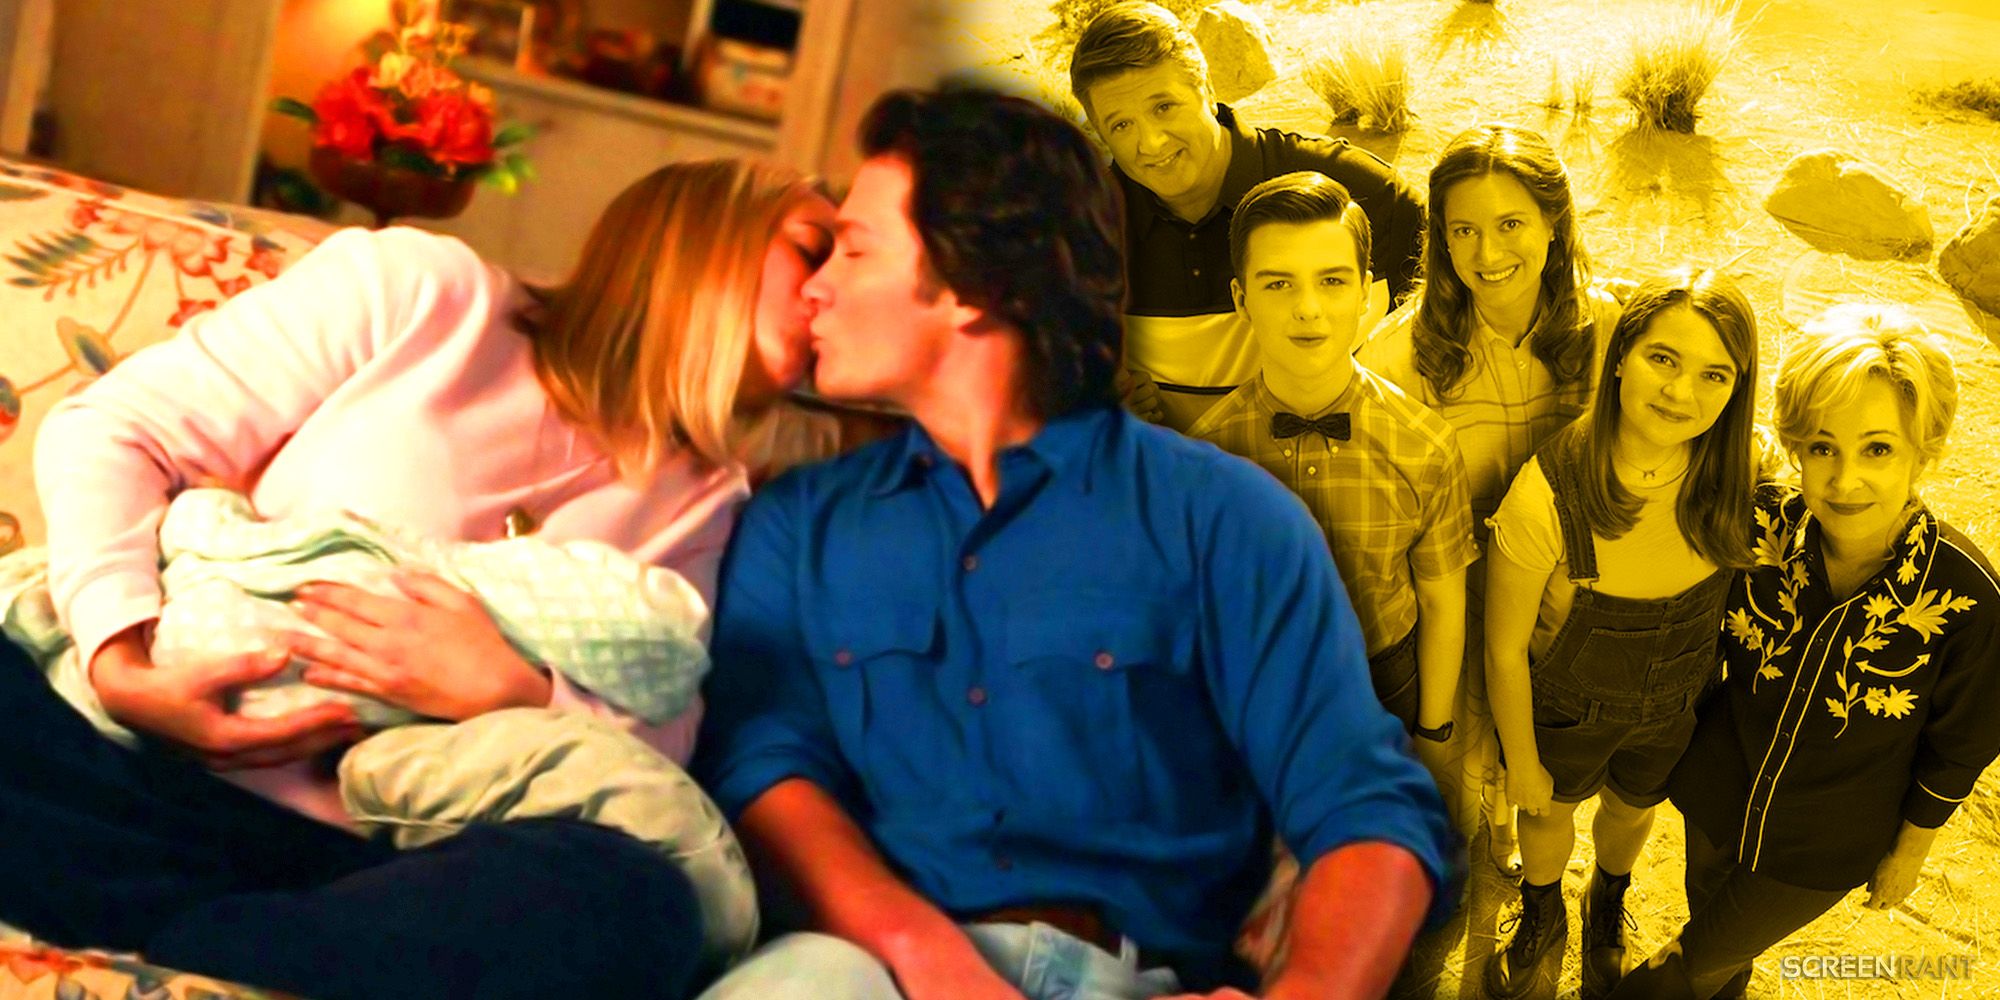 Mandy and Georgie kissing with the new Young Sheldon season 7 intro